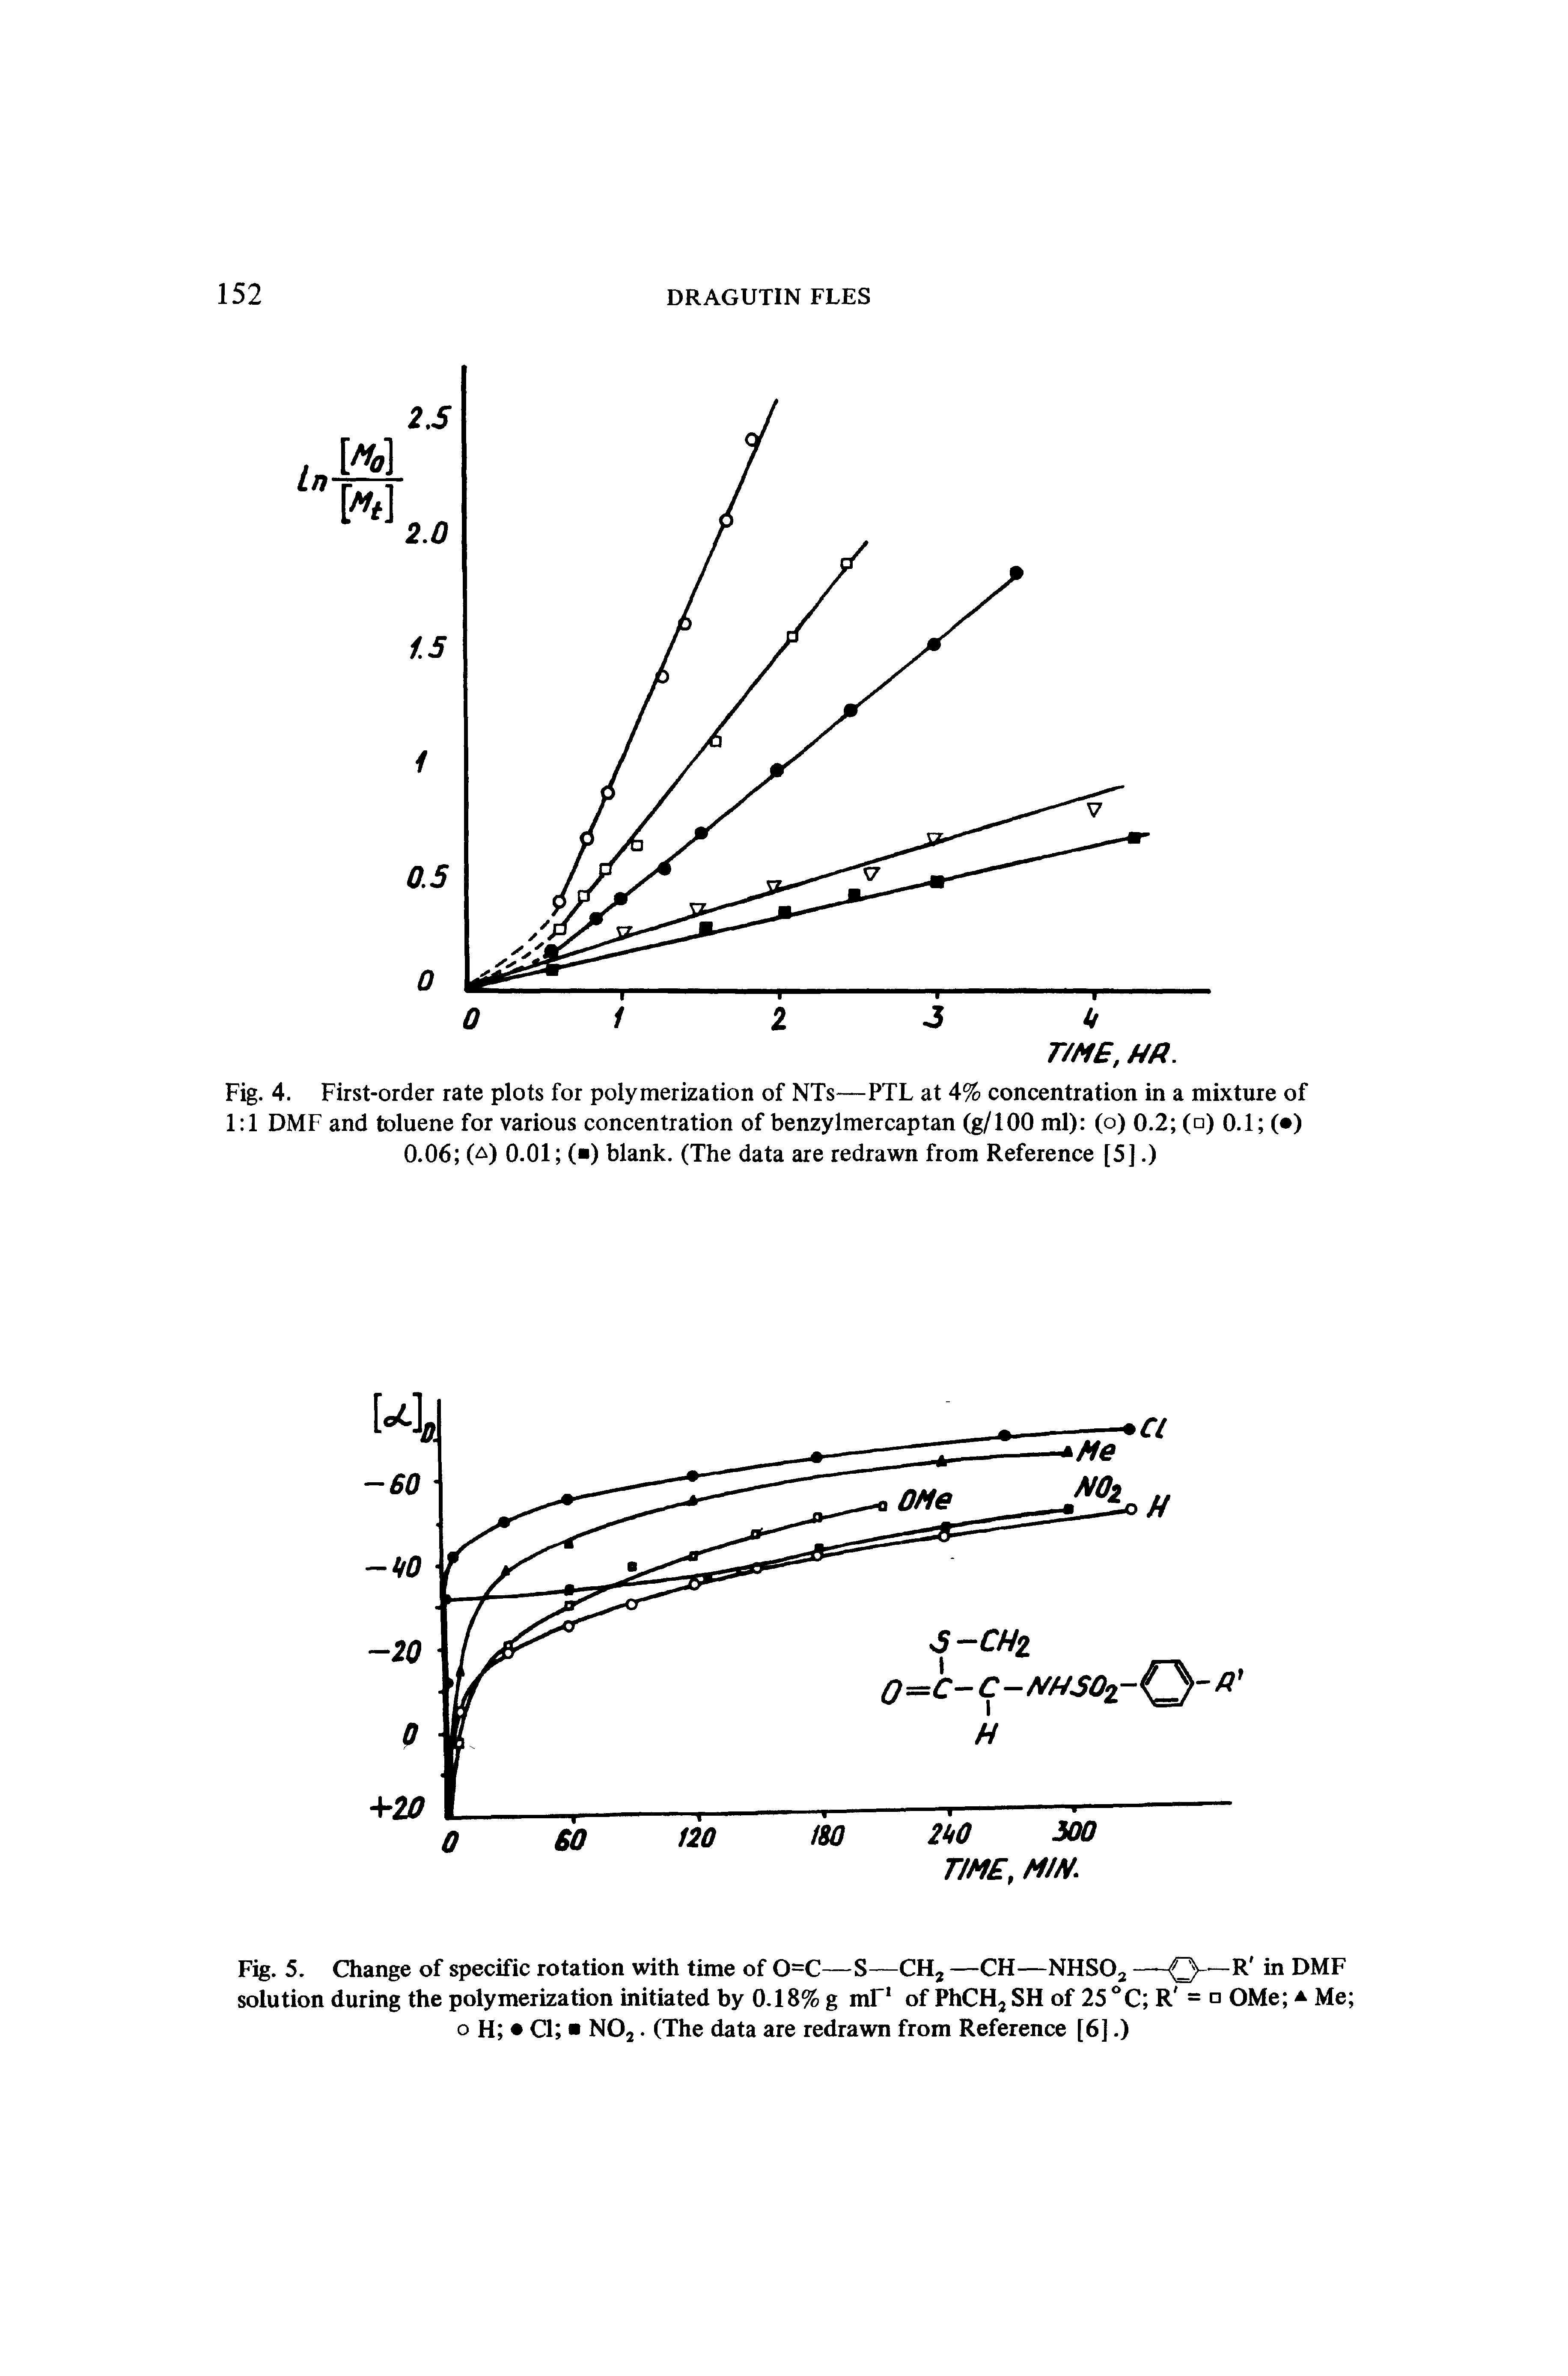 Fig. 4. First-order rate plots for polymerization of NTs—PTL at 4% concentration in a mixture of 1 1 DMF and toluene for various concentration of benzylmercaptan (g/100 ml) (o) 0.2 (o) 0.1 ( ) 0.06 ( ) 0.01 ( ) blank. (The data are redrawn from Reference [5].)...